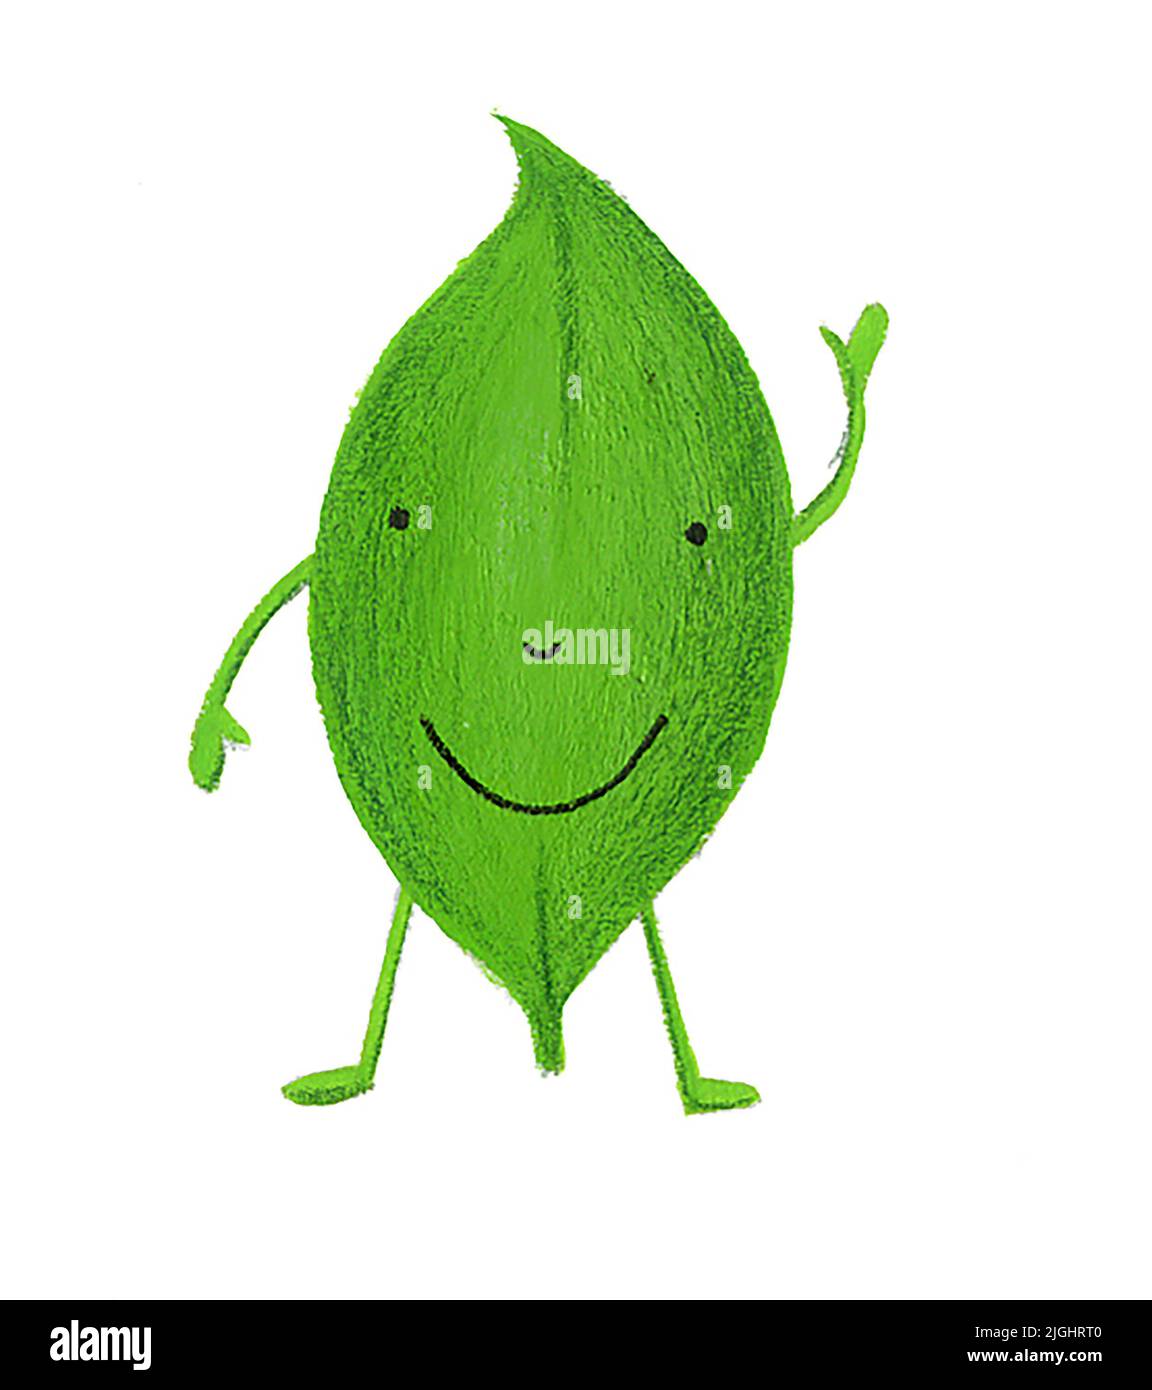 Illustration of leaf with smiley face, close-up Stock Photo